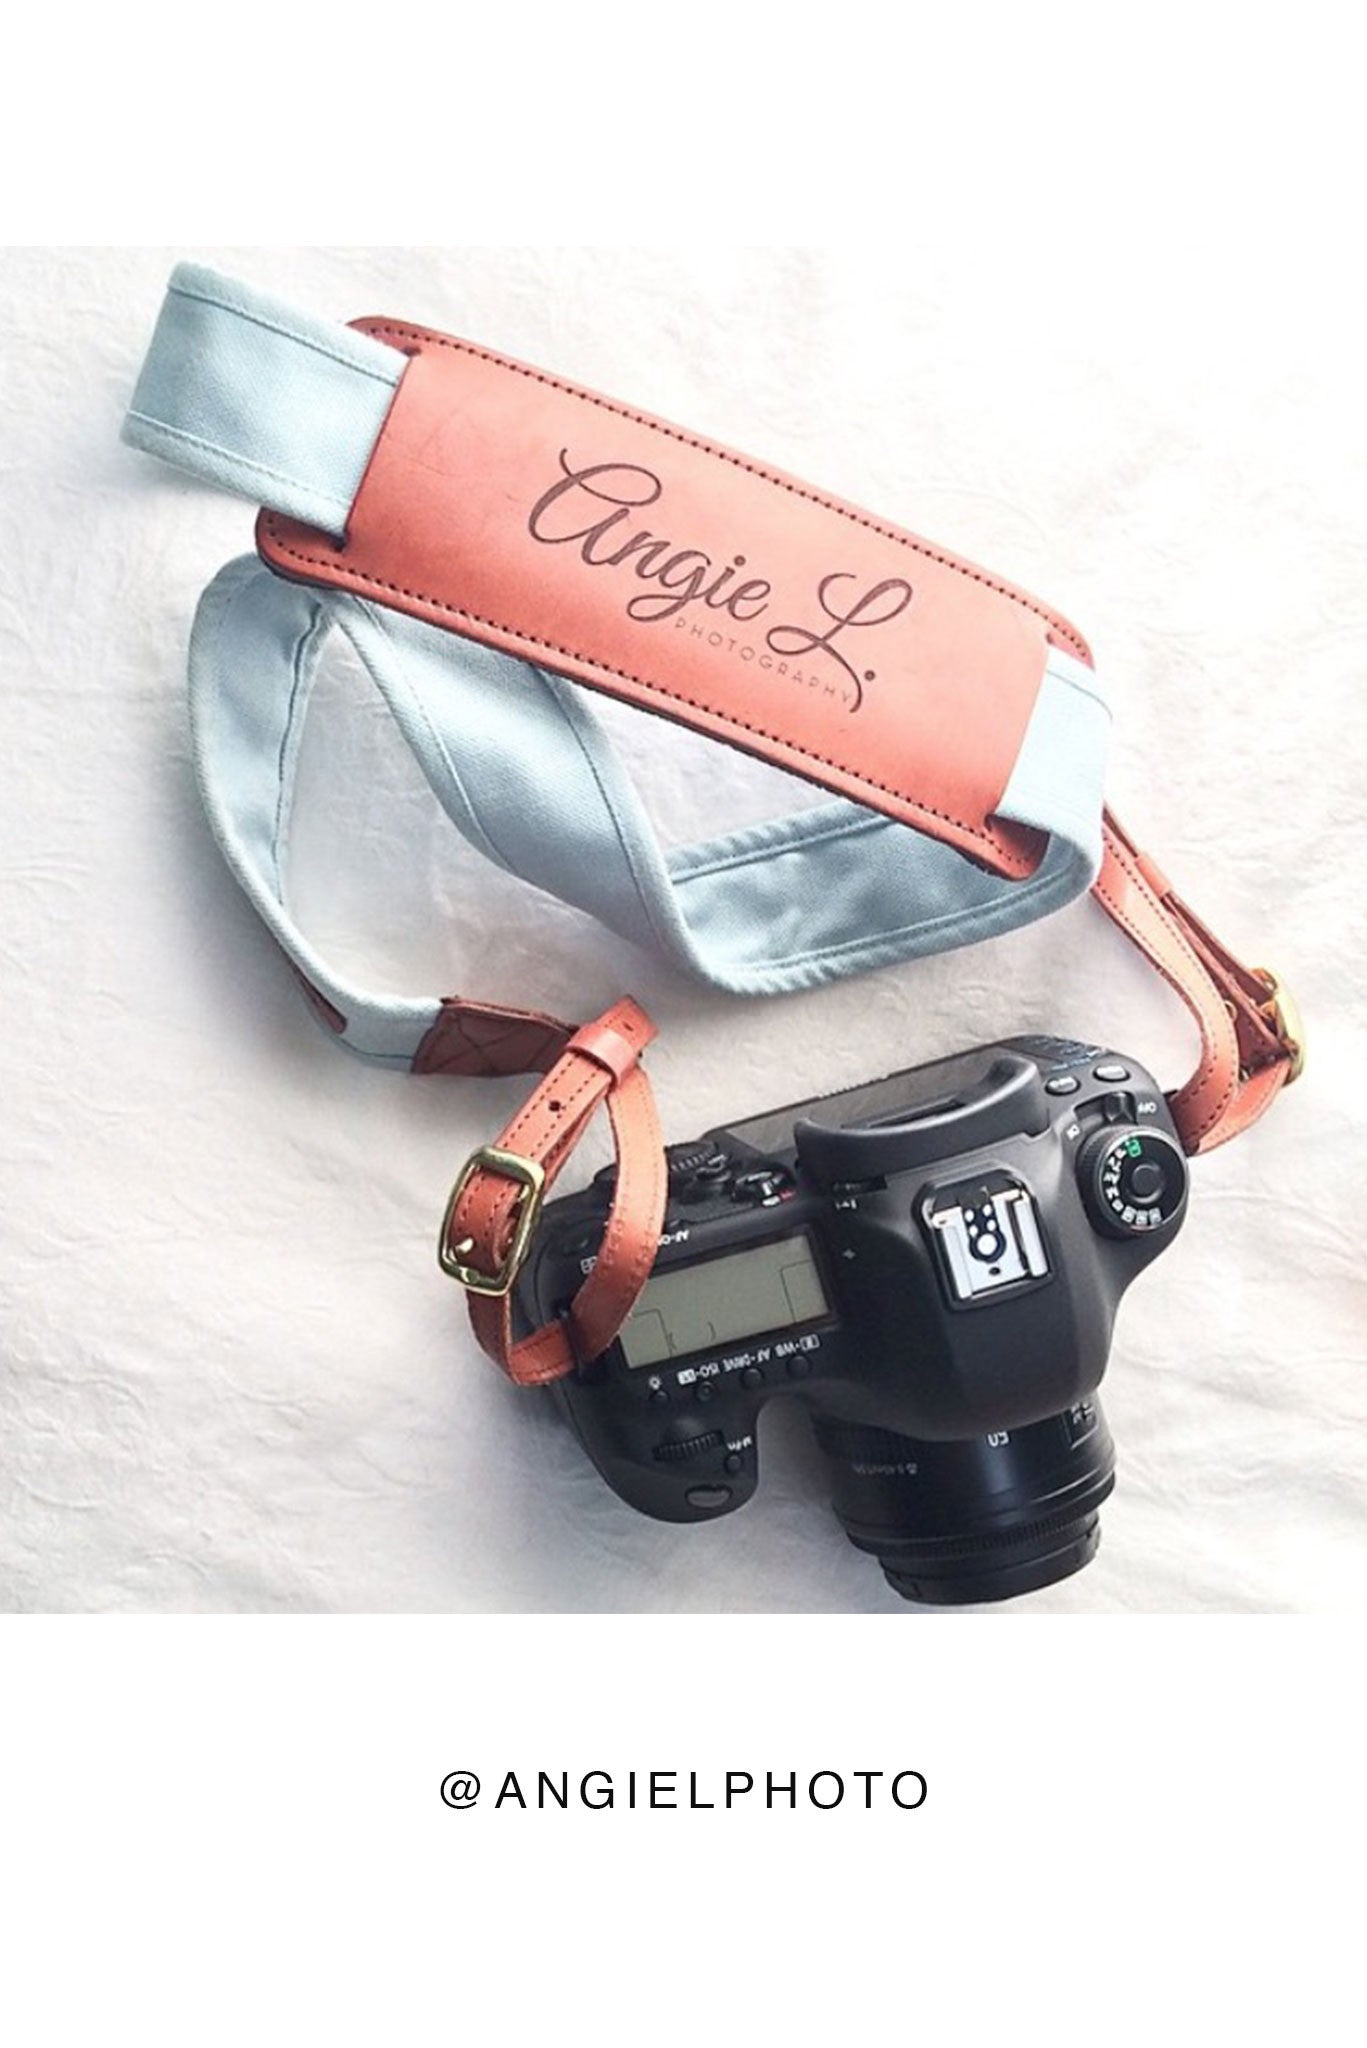 FOTO | Sky Fotostrap - a light blue canvas and genuine leather camera strap that can be personalized with a monogram or business logo, making it the perfect personalized gift! 